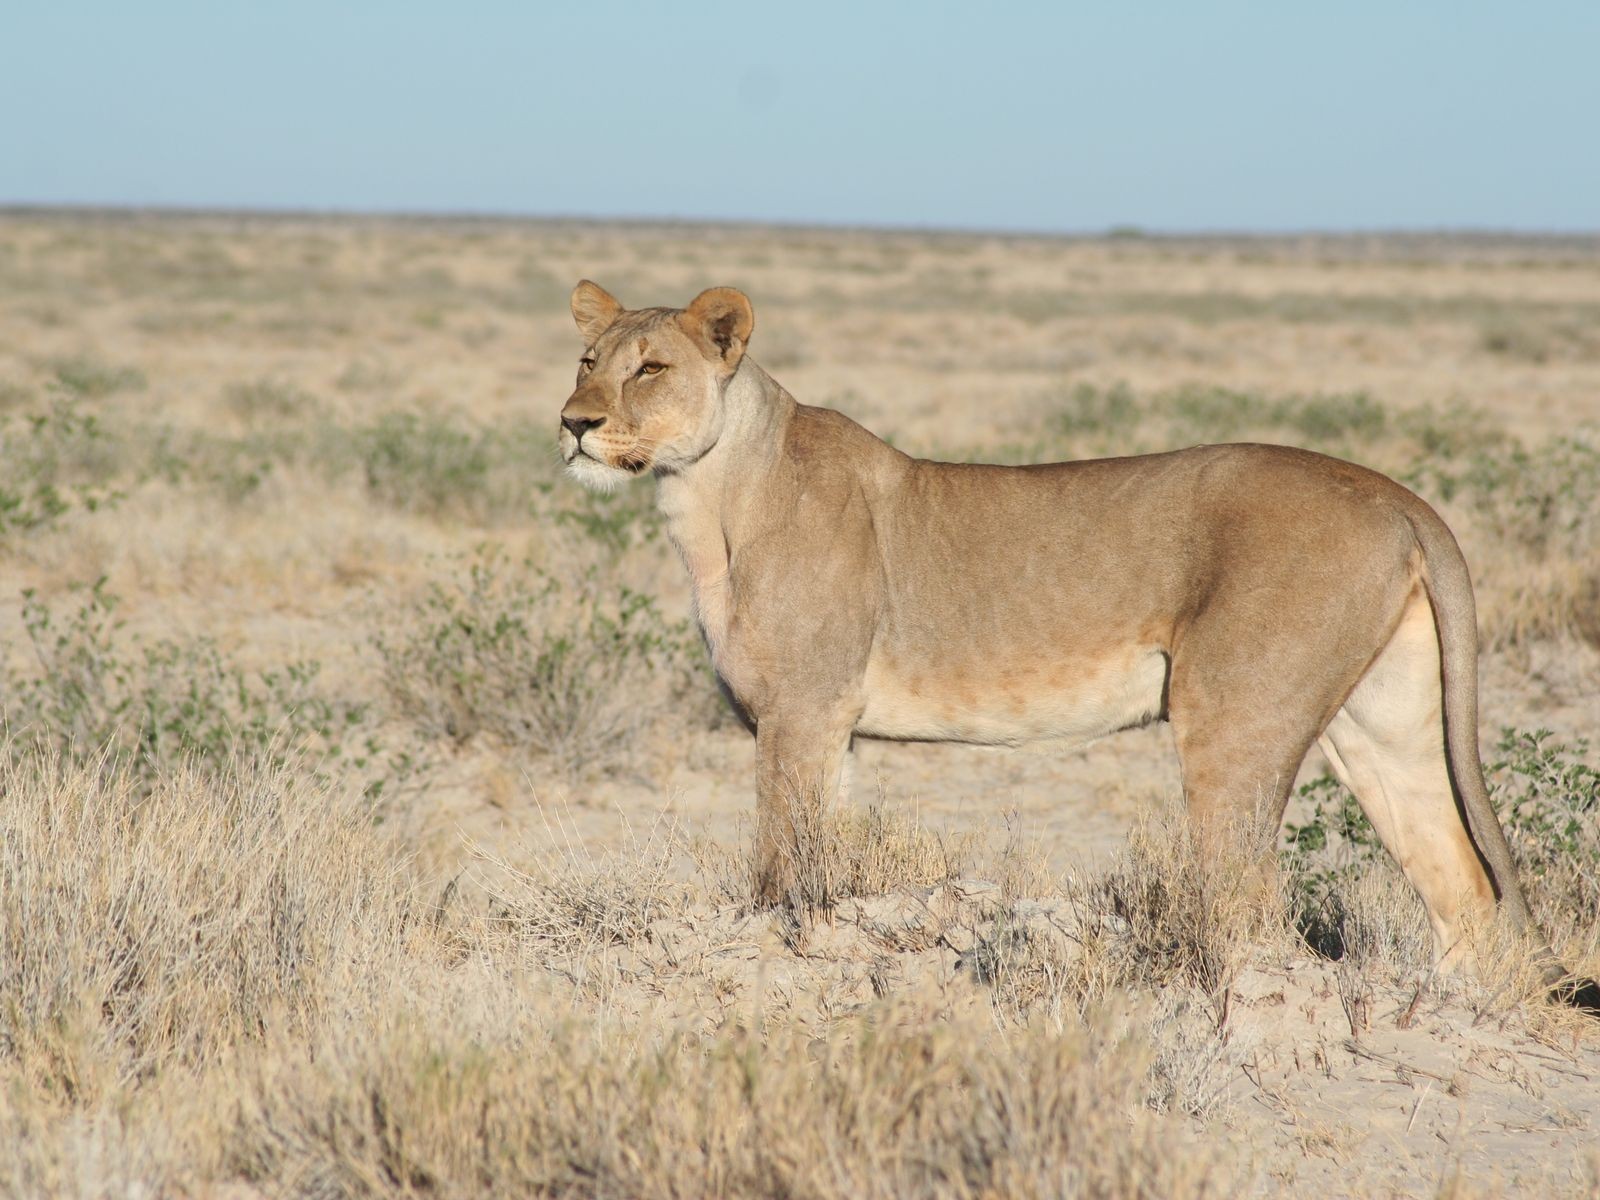 Lioness went on a hunt wallpapers and images - wallpapers, pictures ...